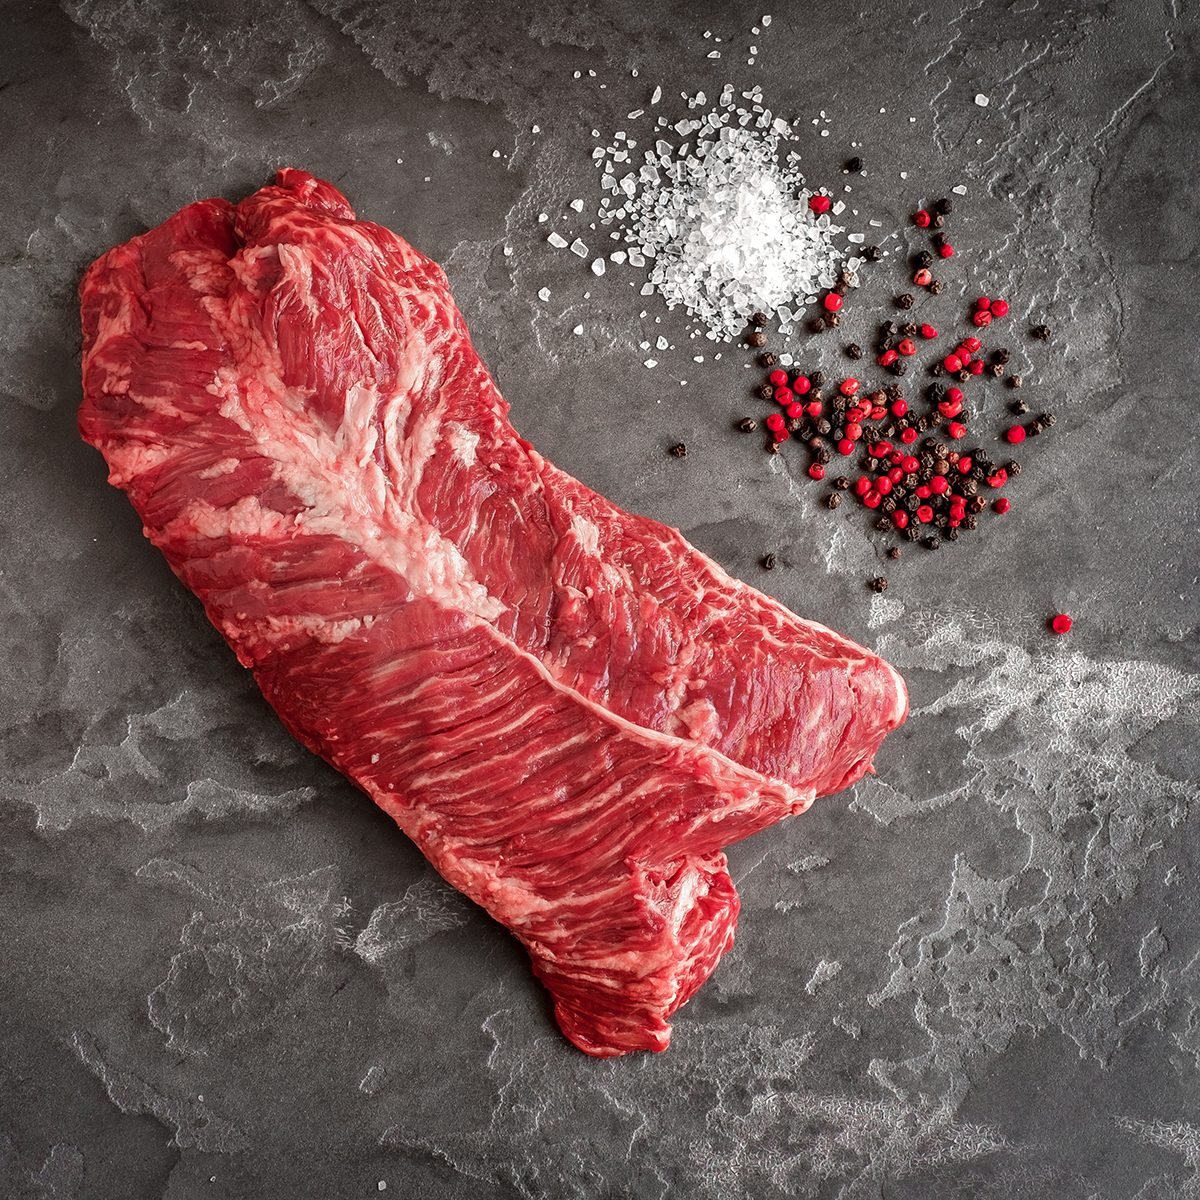 How to Cook the 16 Most Common Types of Steak